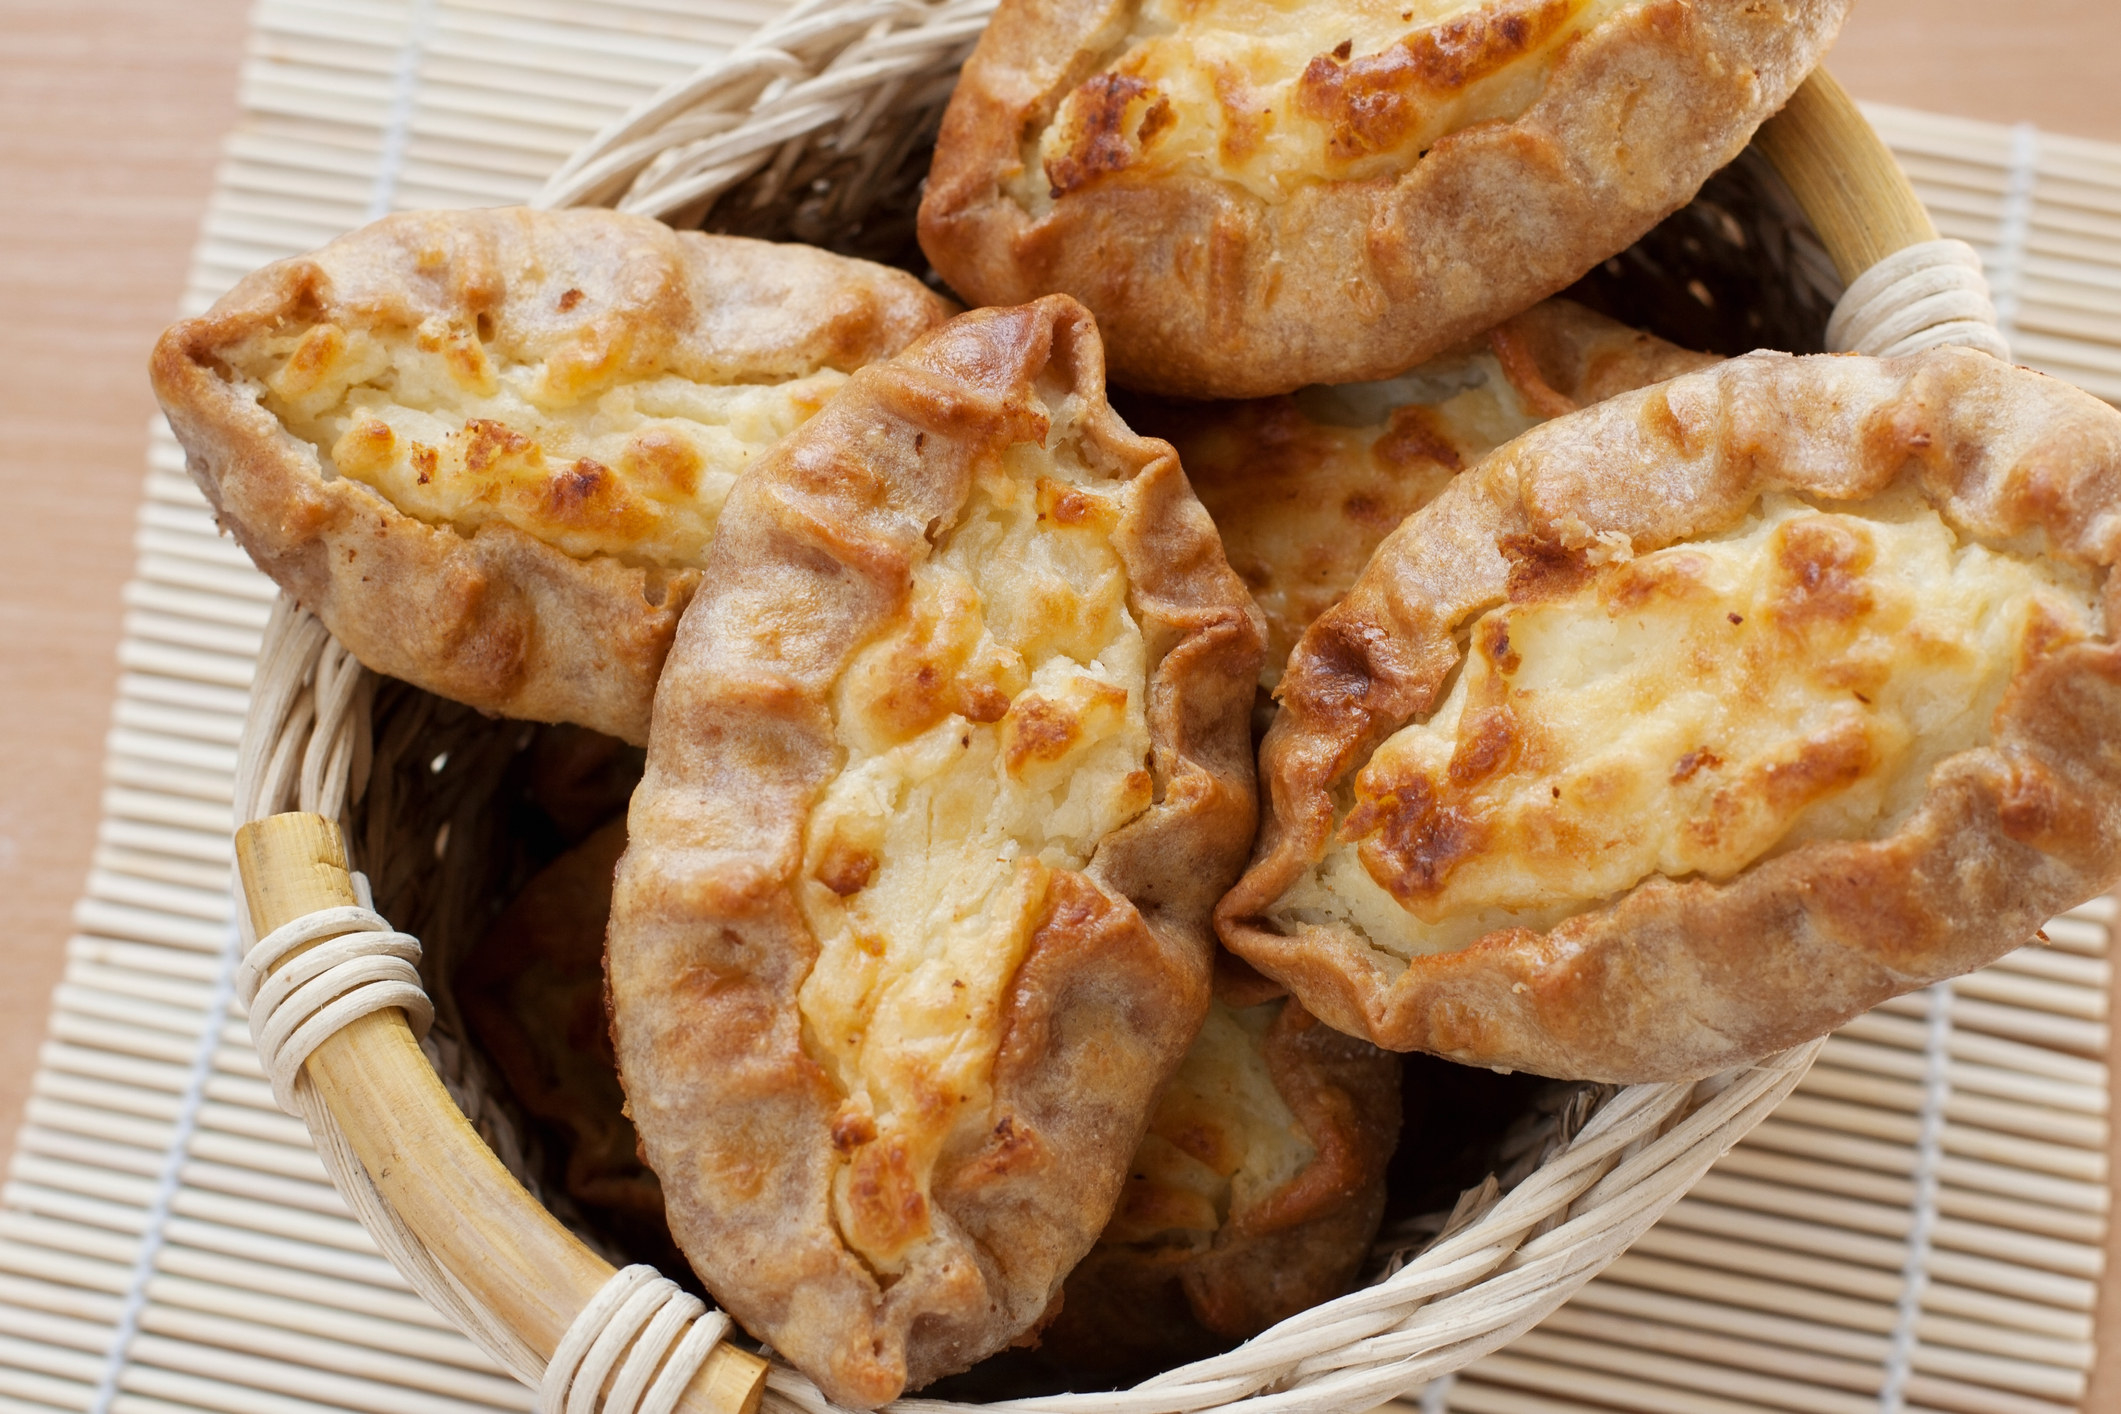 rustic-looking hand pies with a bread-like crust and a potato filling